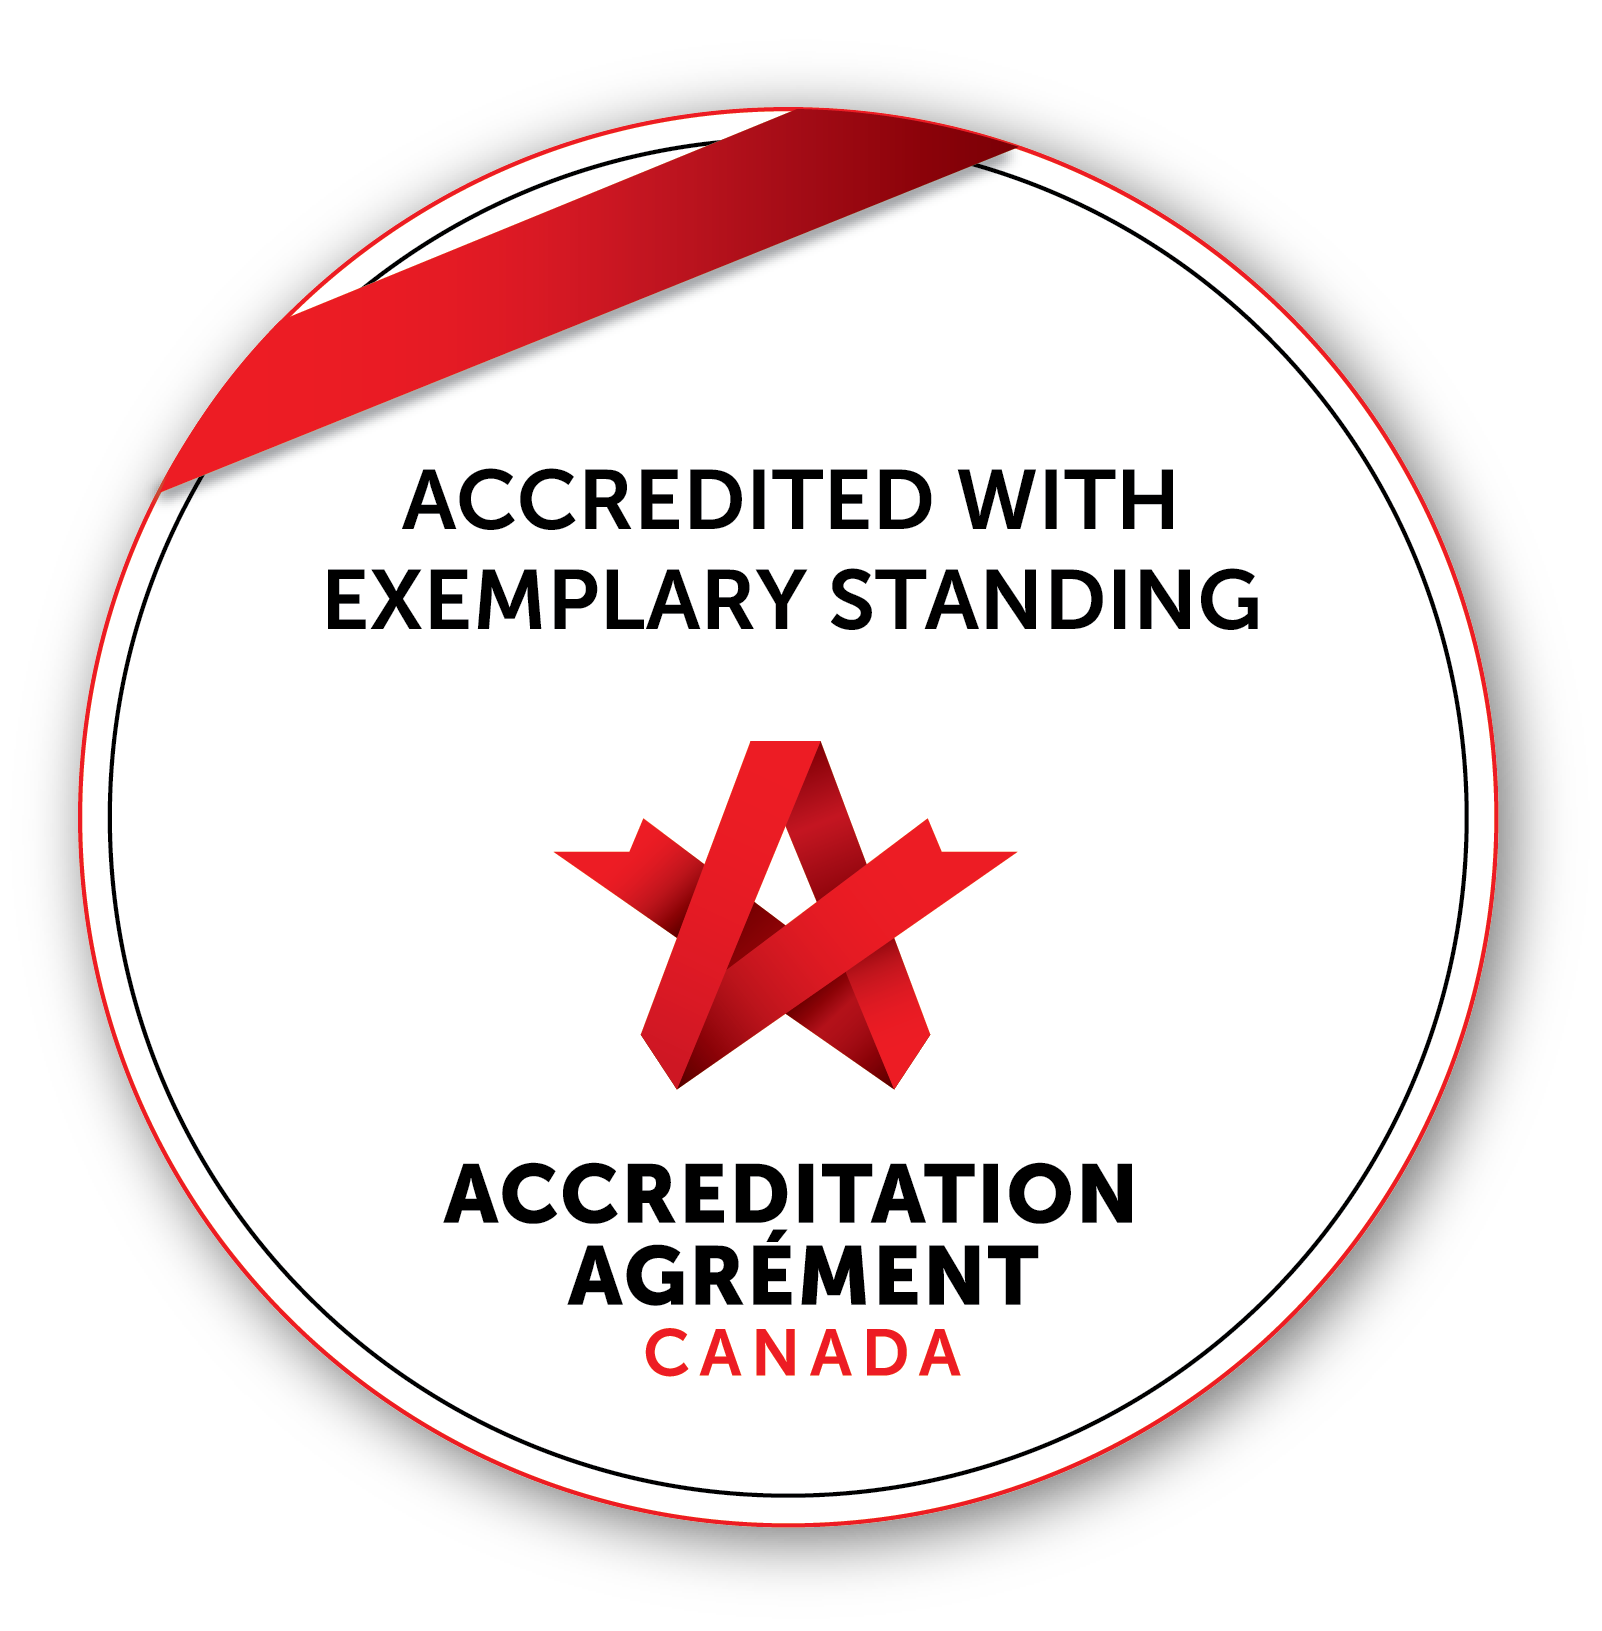 Accredited with Exemplary Standing Seal